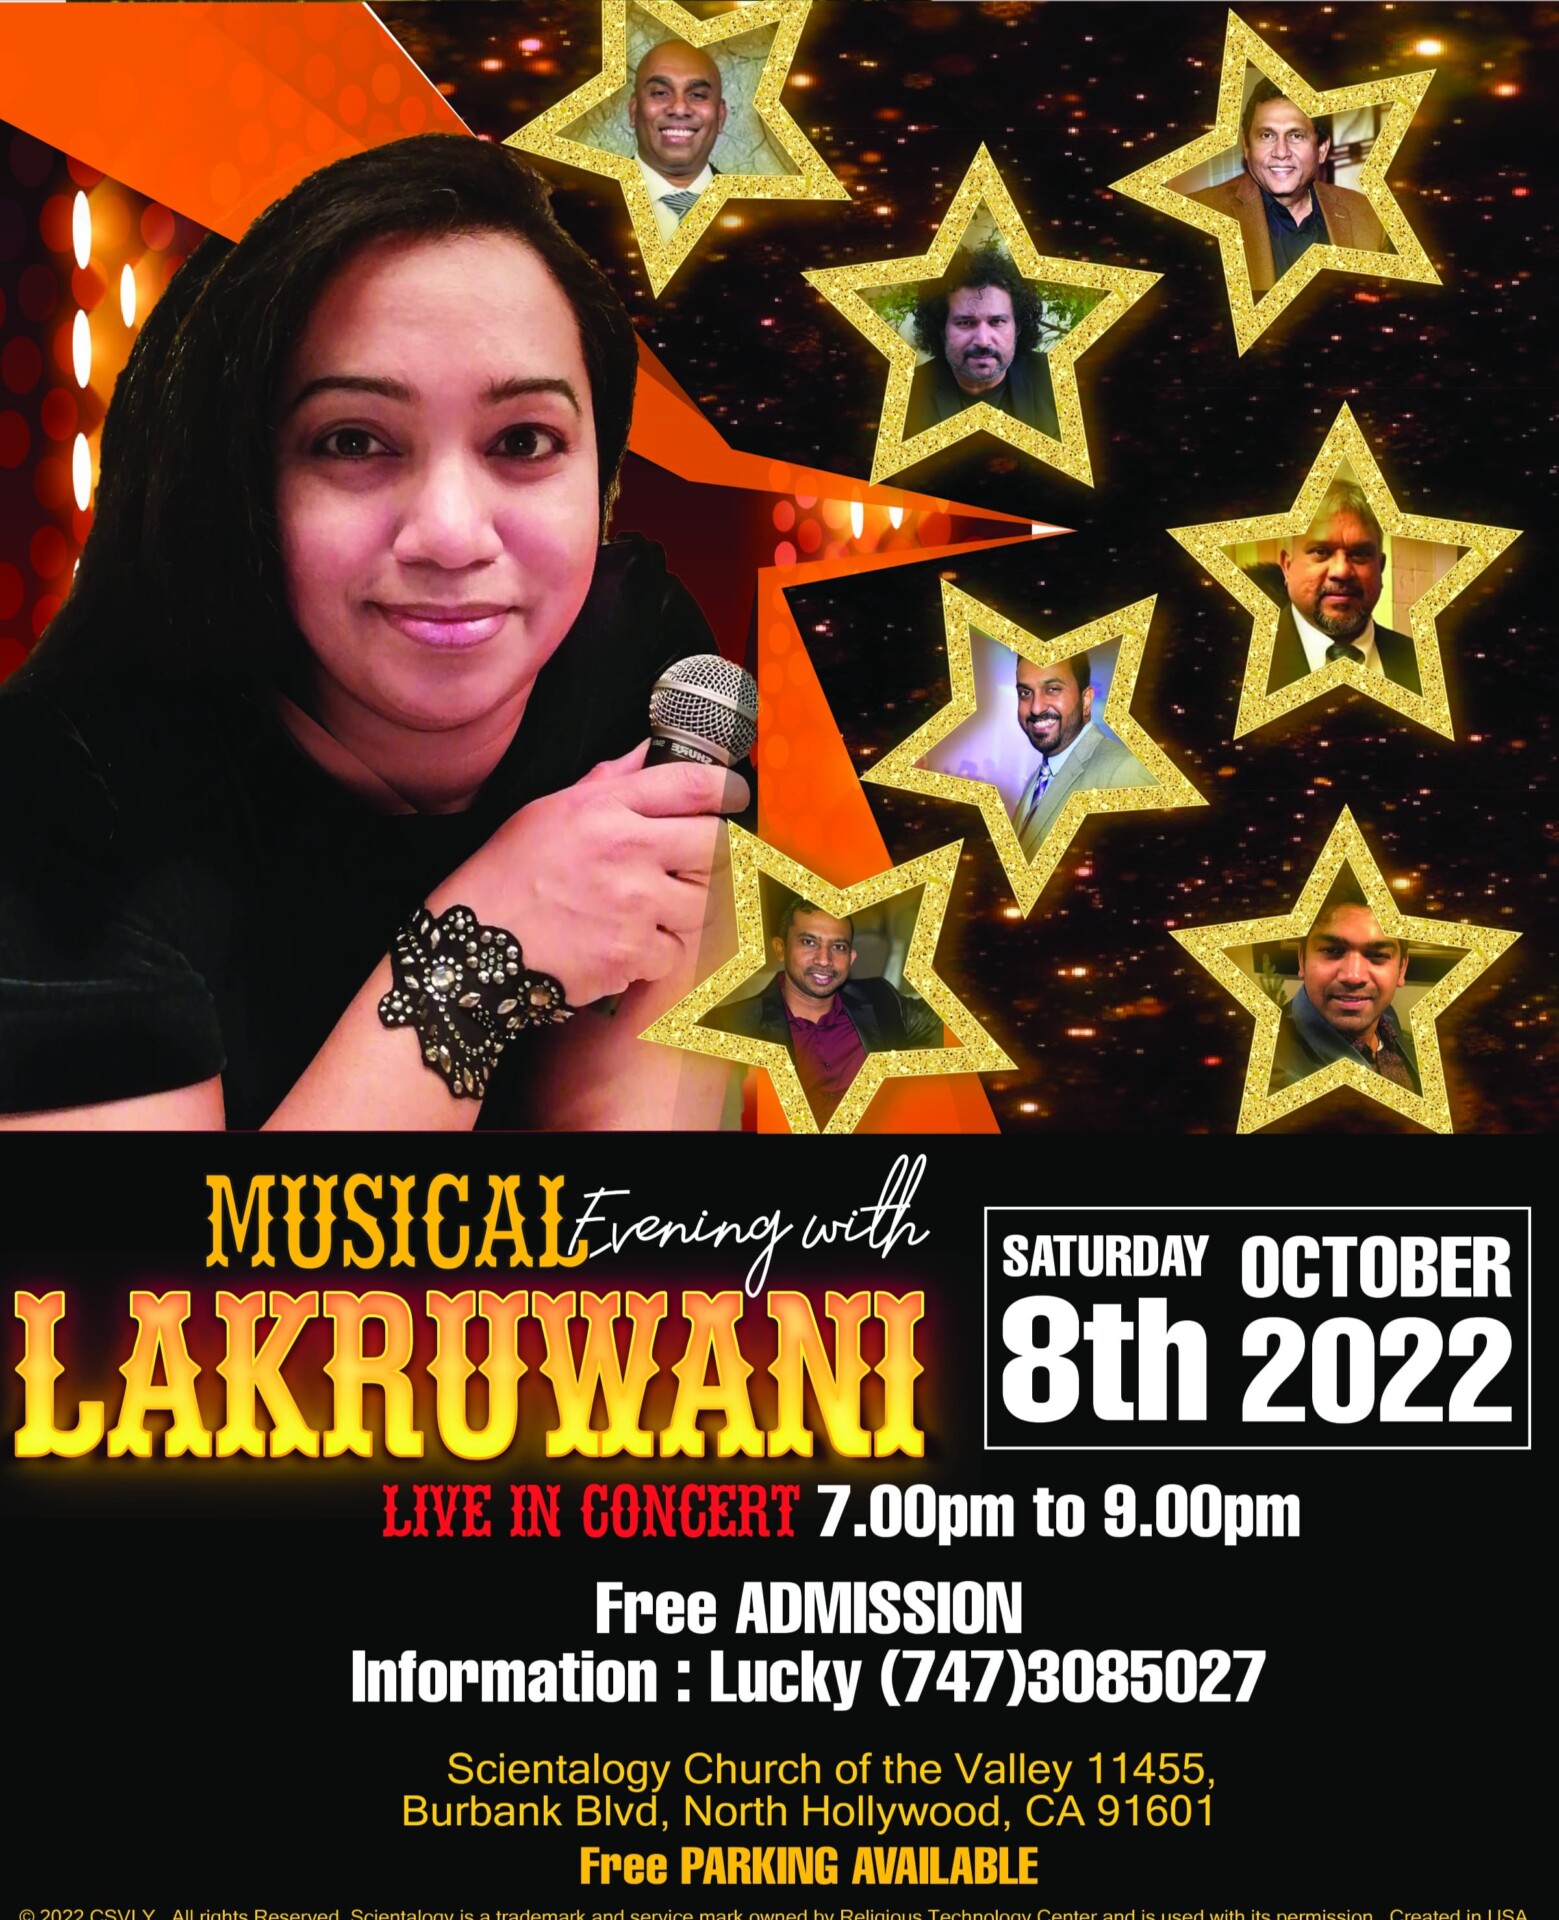 MUSICAL EVENING WITH LAKRUWANI